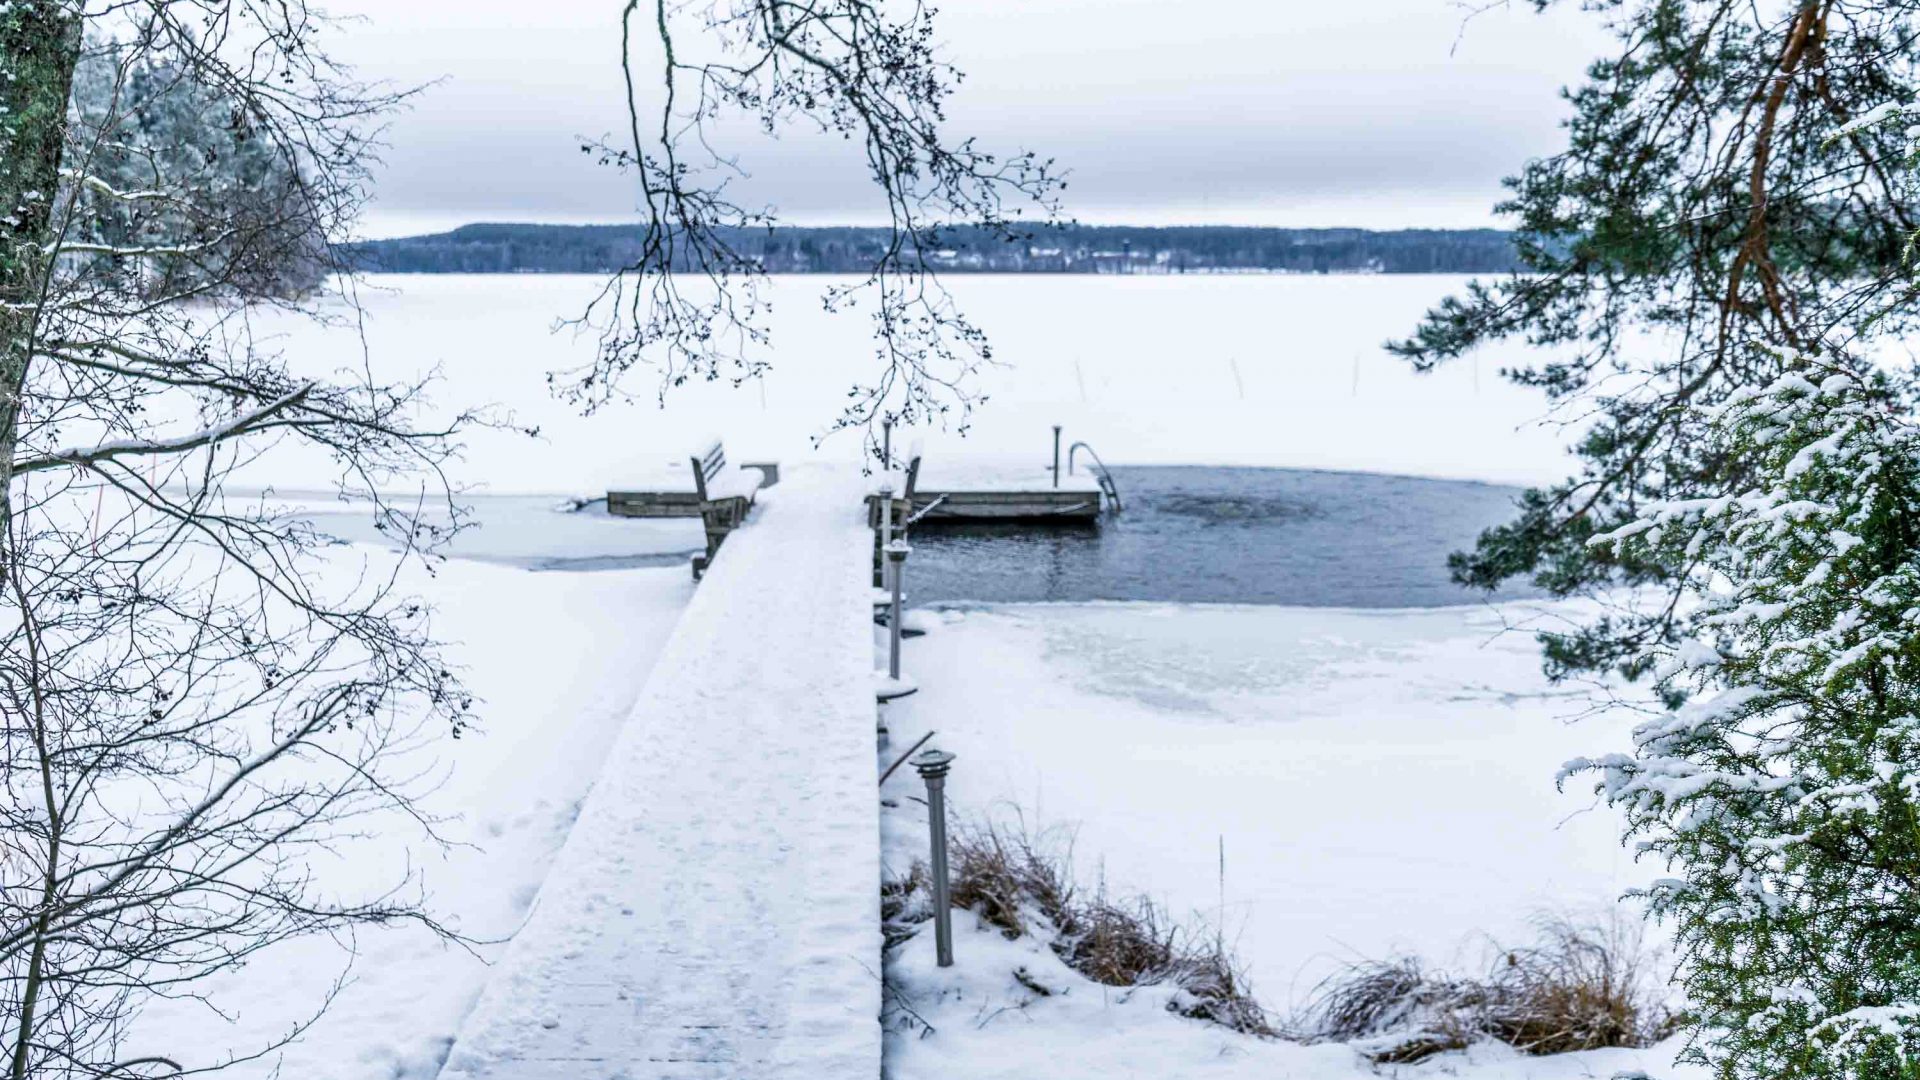 Ice swimming in one of Finland's lake is an invigorating activity for many Finns.